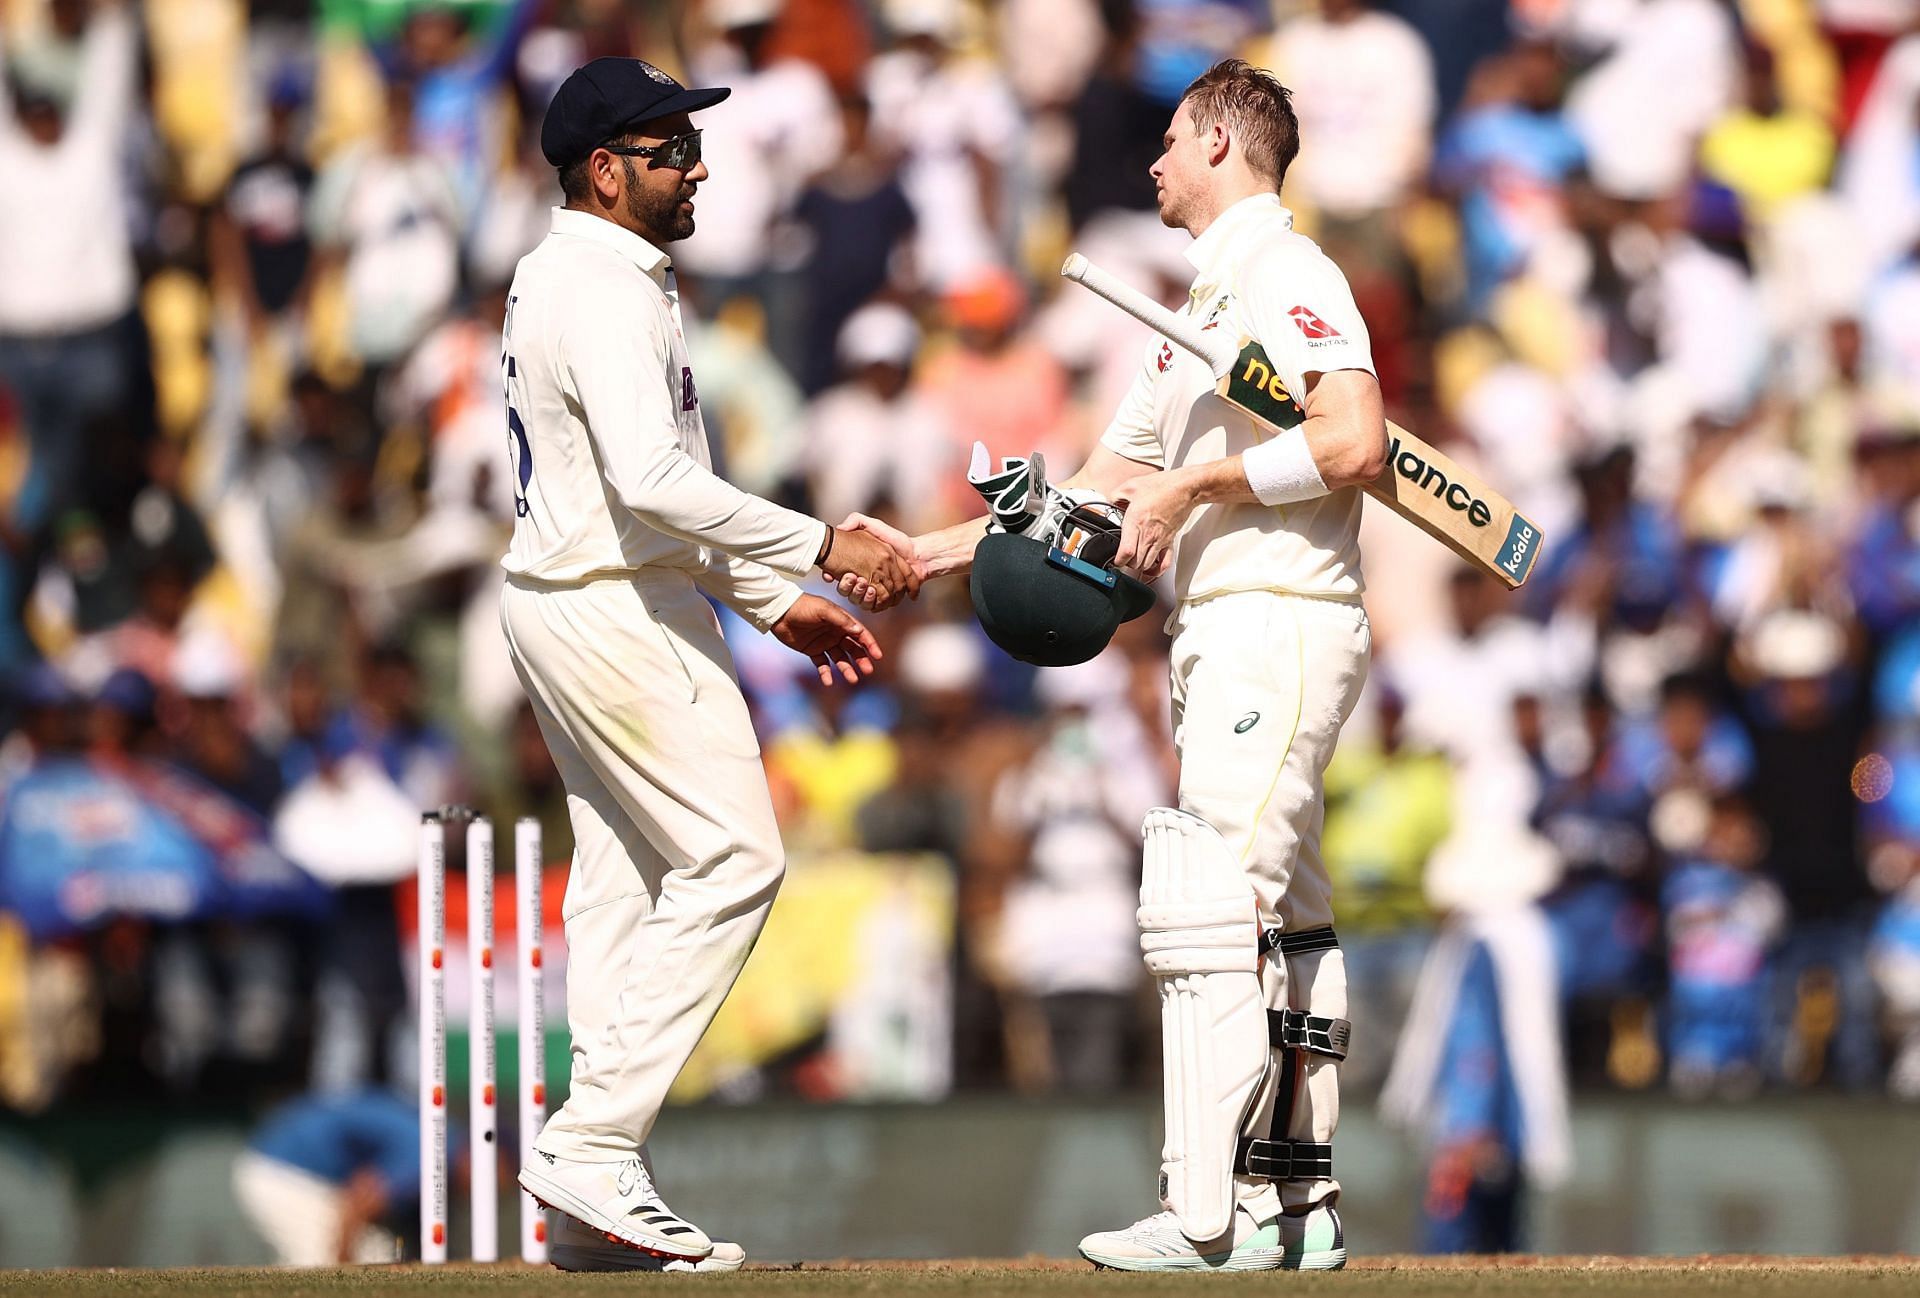 Sizzling Images from India's Incredible 1st Test Match Win Against Australia!